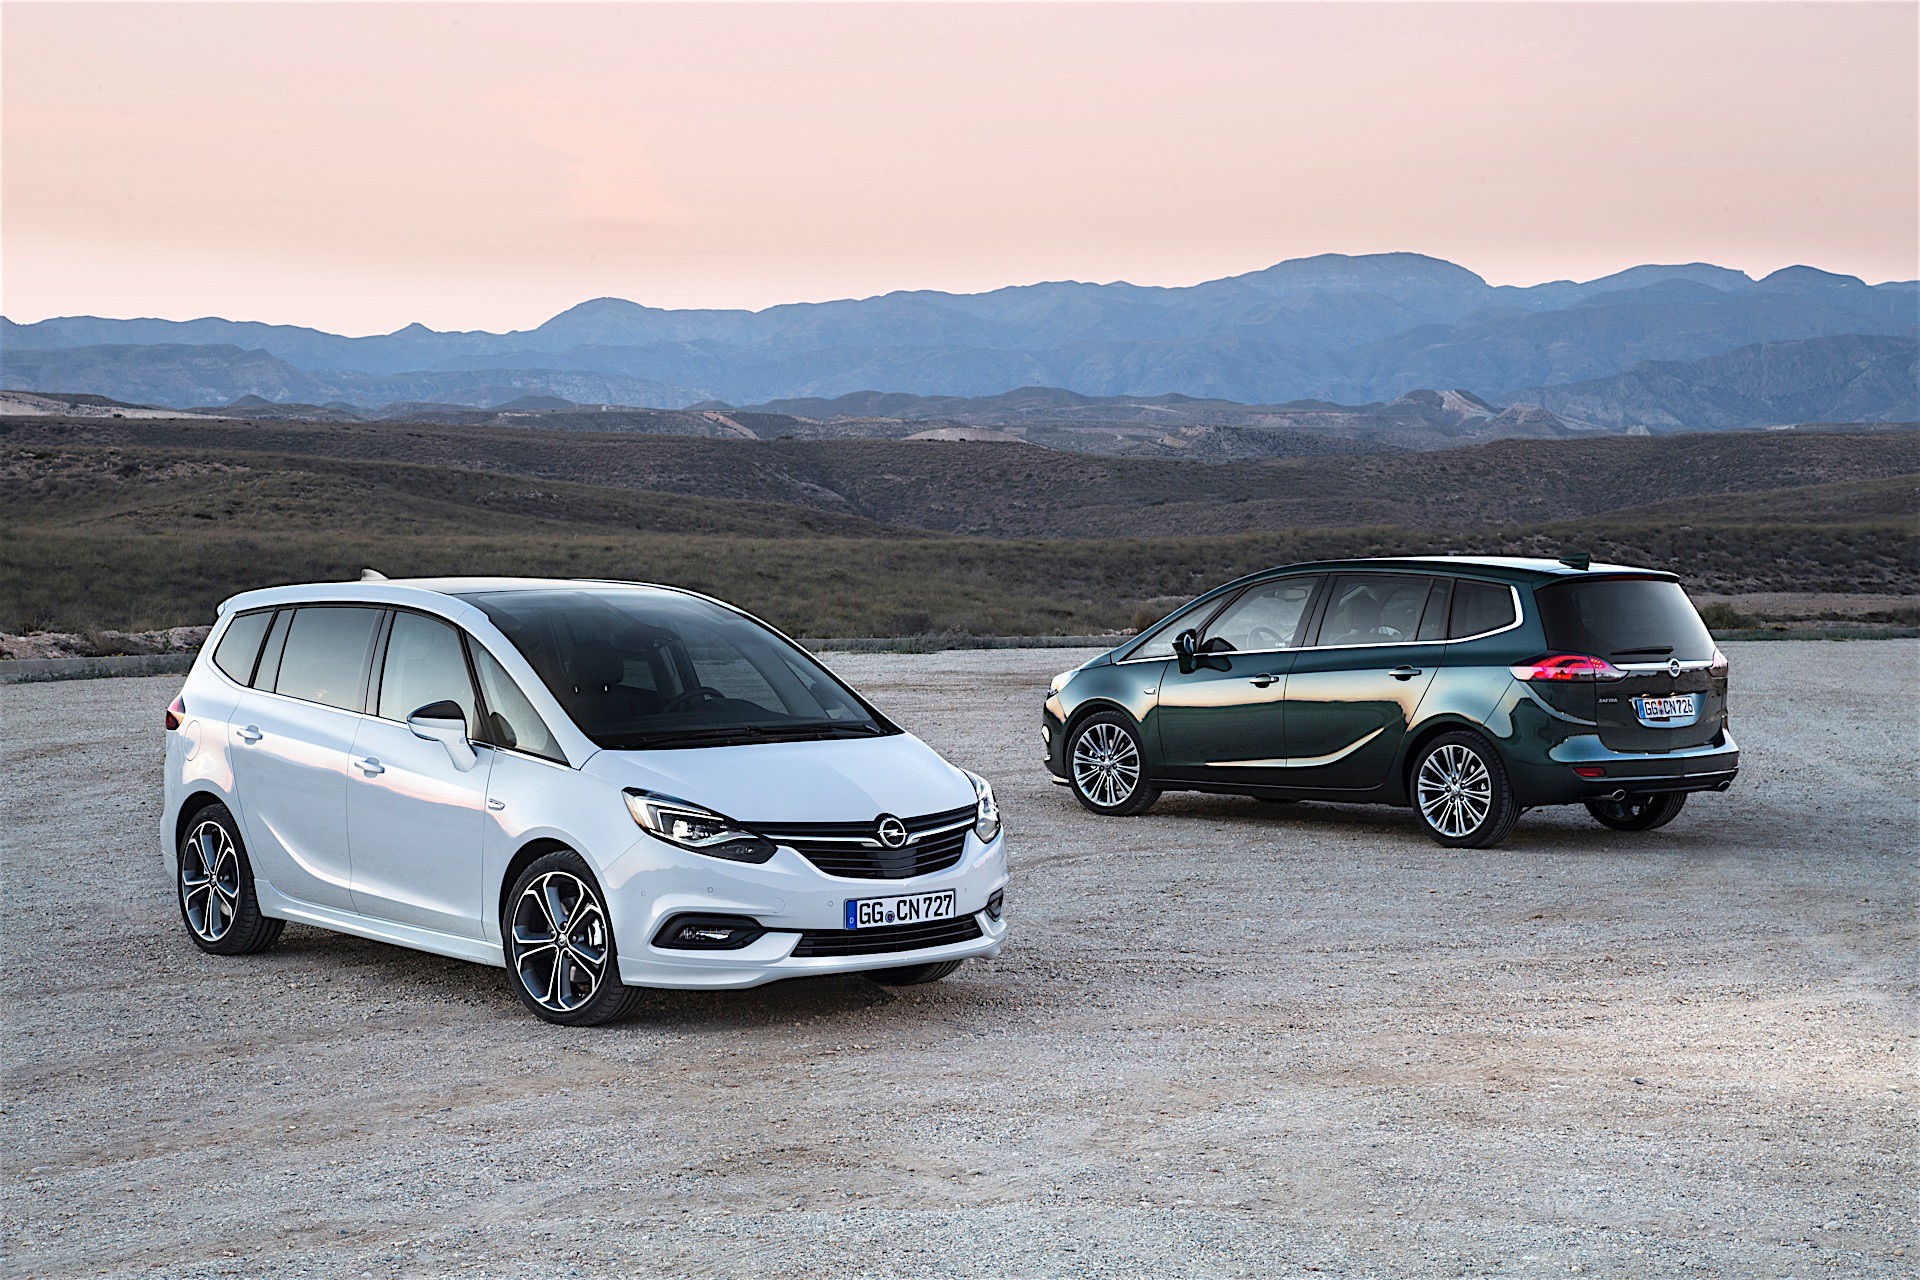 2017 Opel Zafira Officially Revealed, Looks Great For An MPV ...